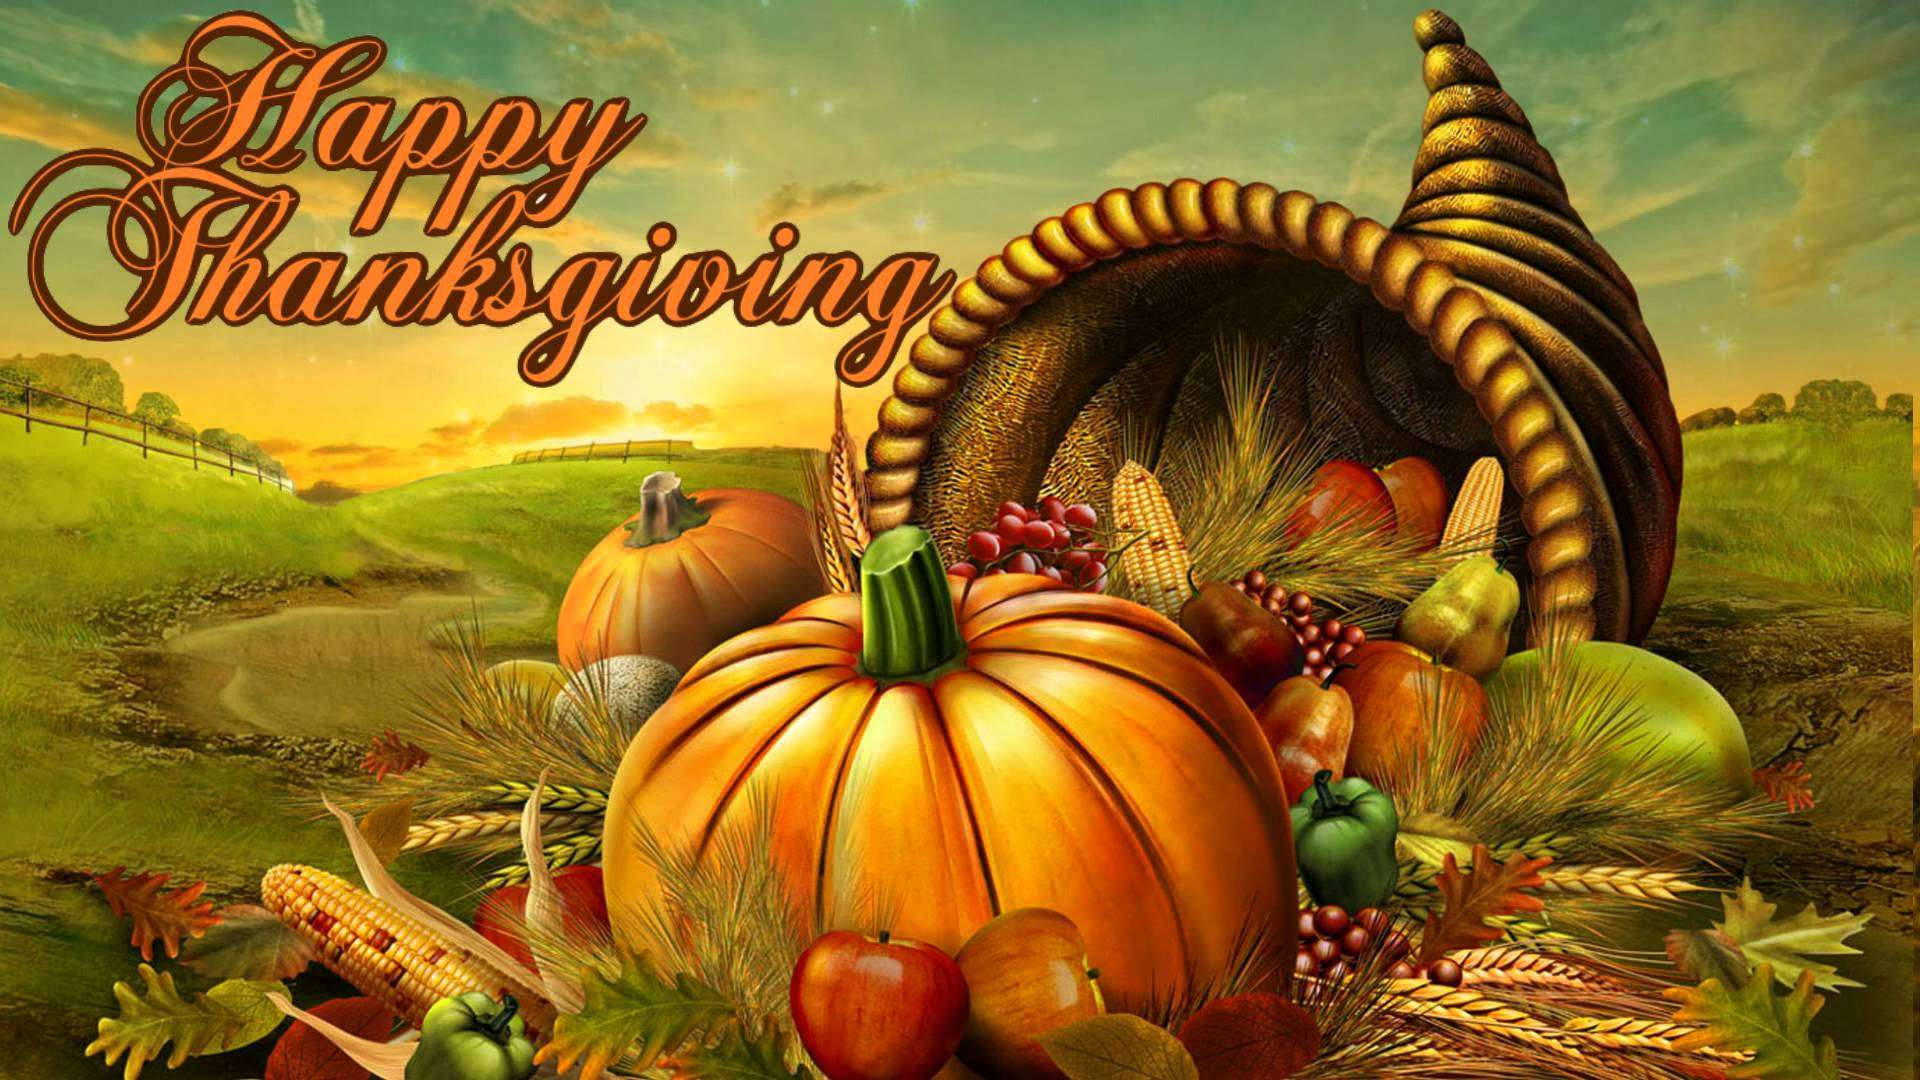 "Let us be grateful for the bountiful harvest and joyous festivities of Thanksgiving!" Wallpaper